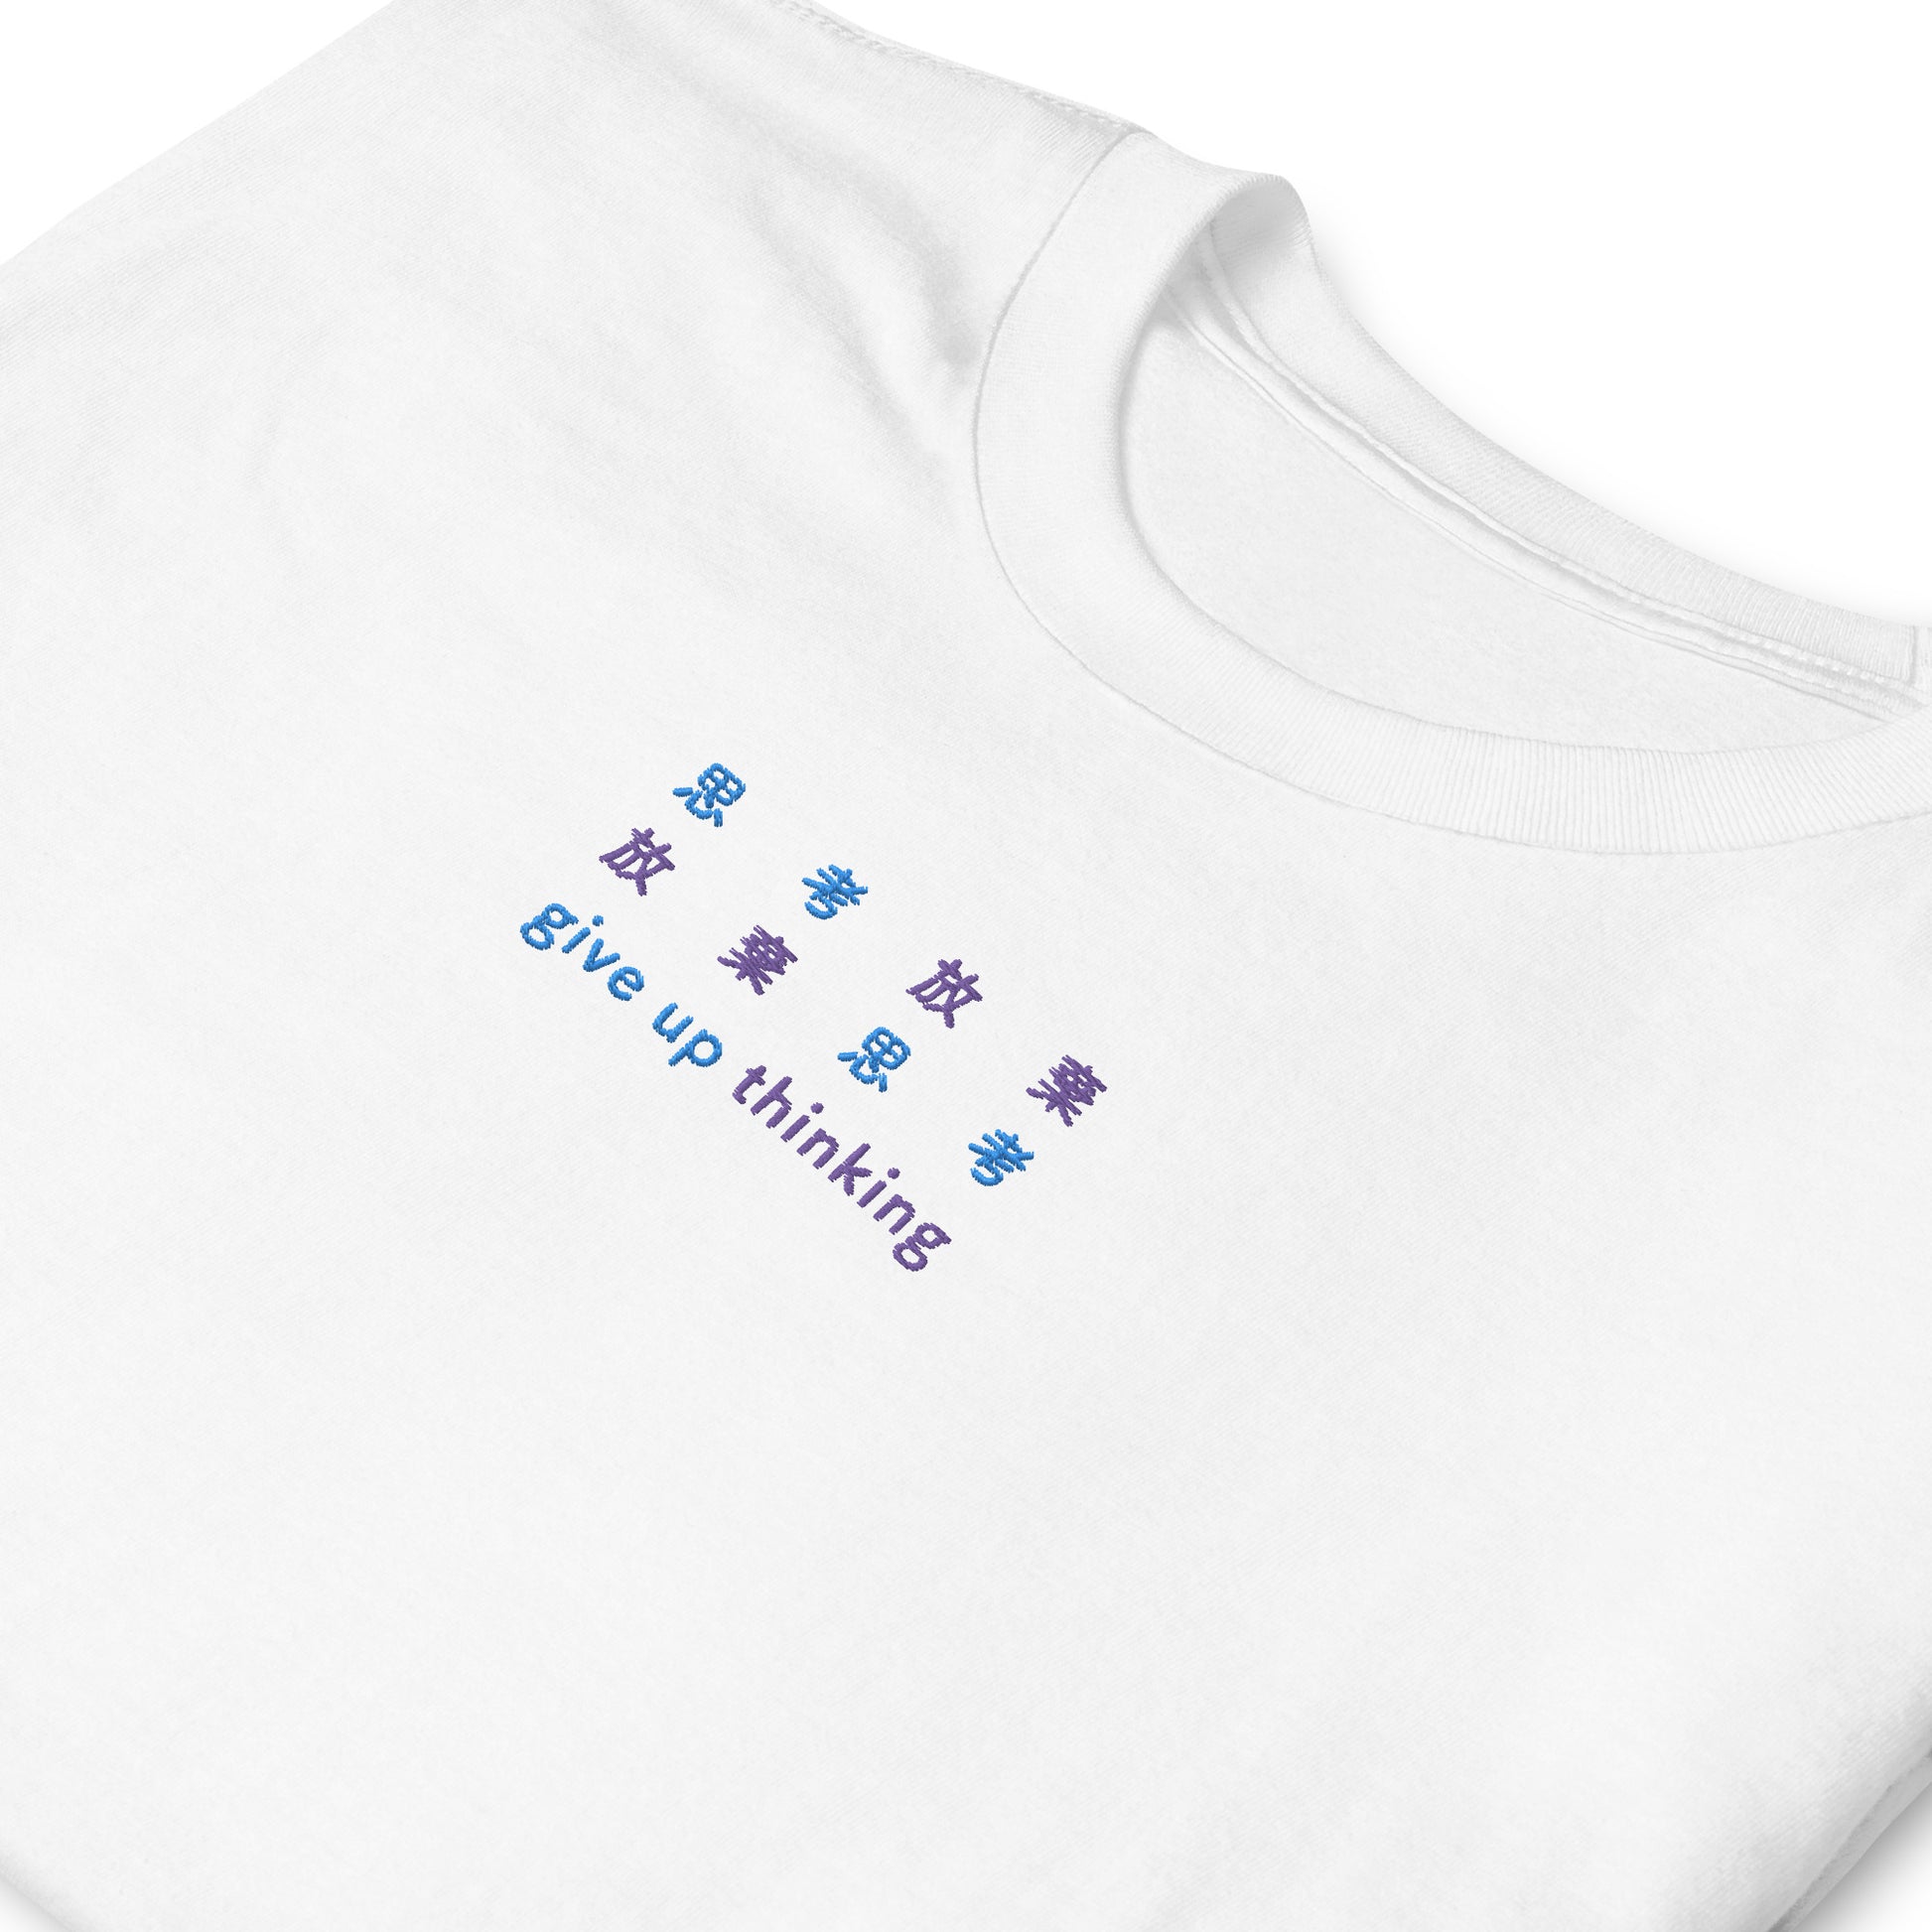 White High Quality Tee - Front Design with an Light Blue, Purple Embroidery "Give Up Thinking" in Japanese,Chinese and English